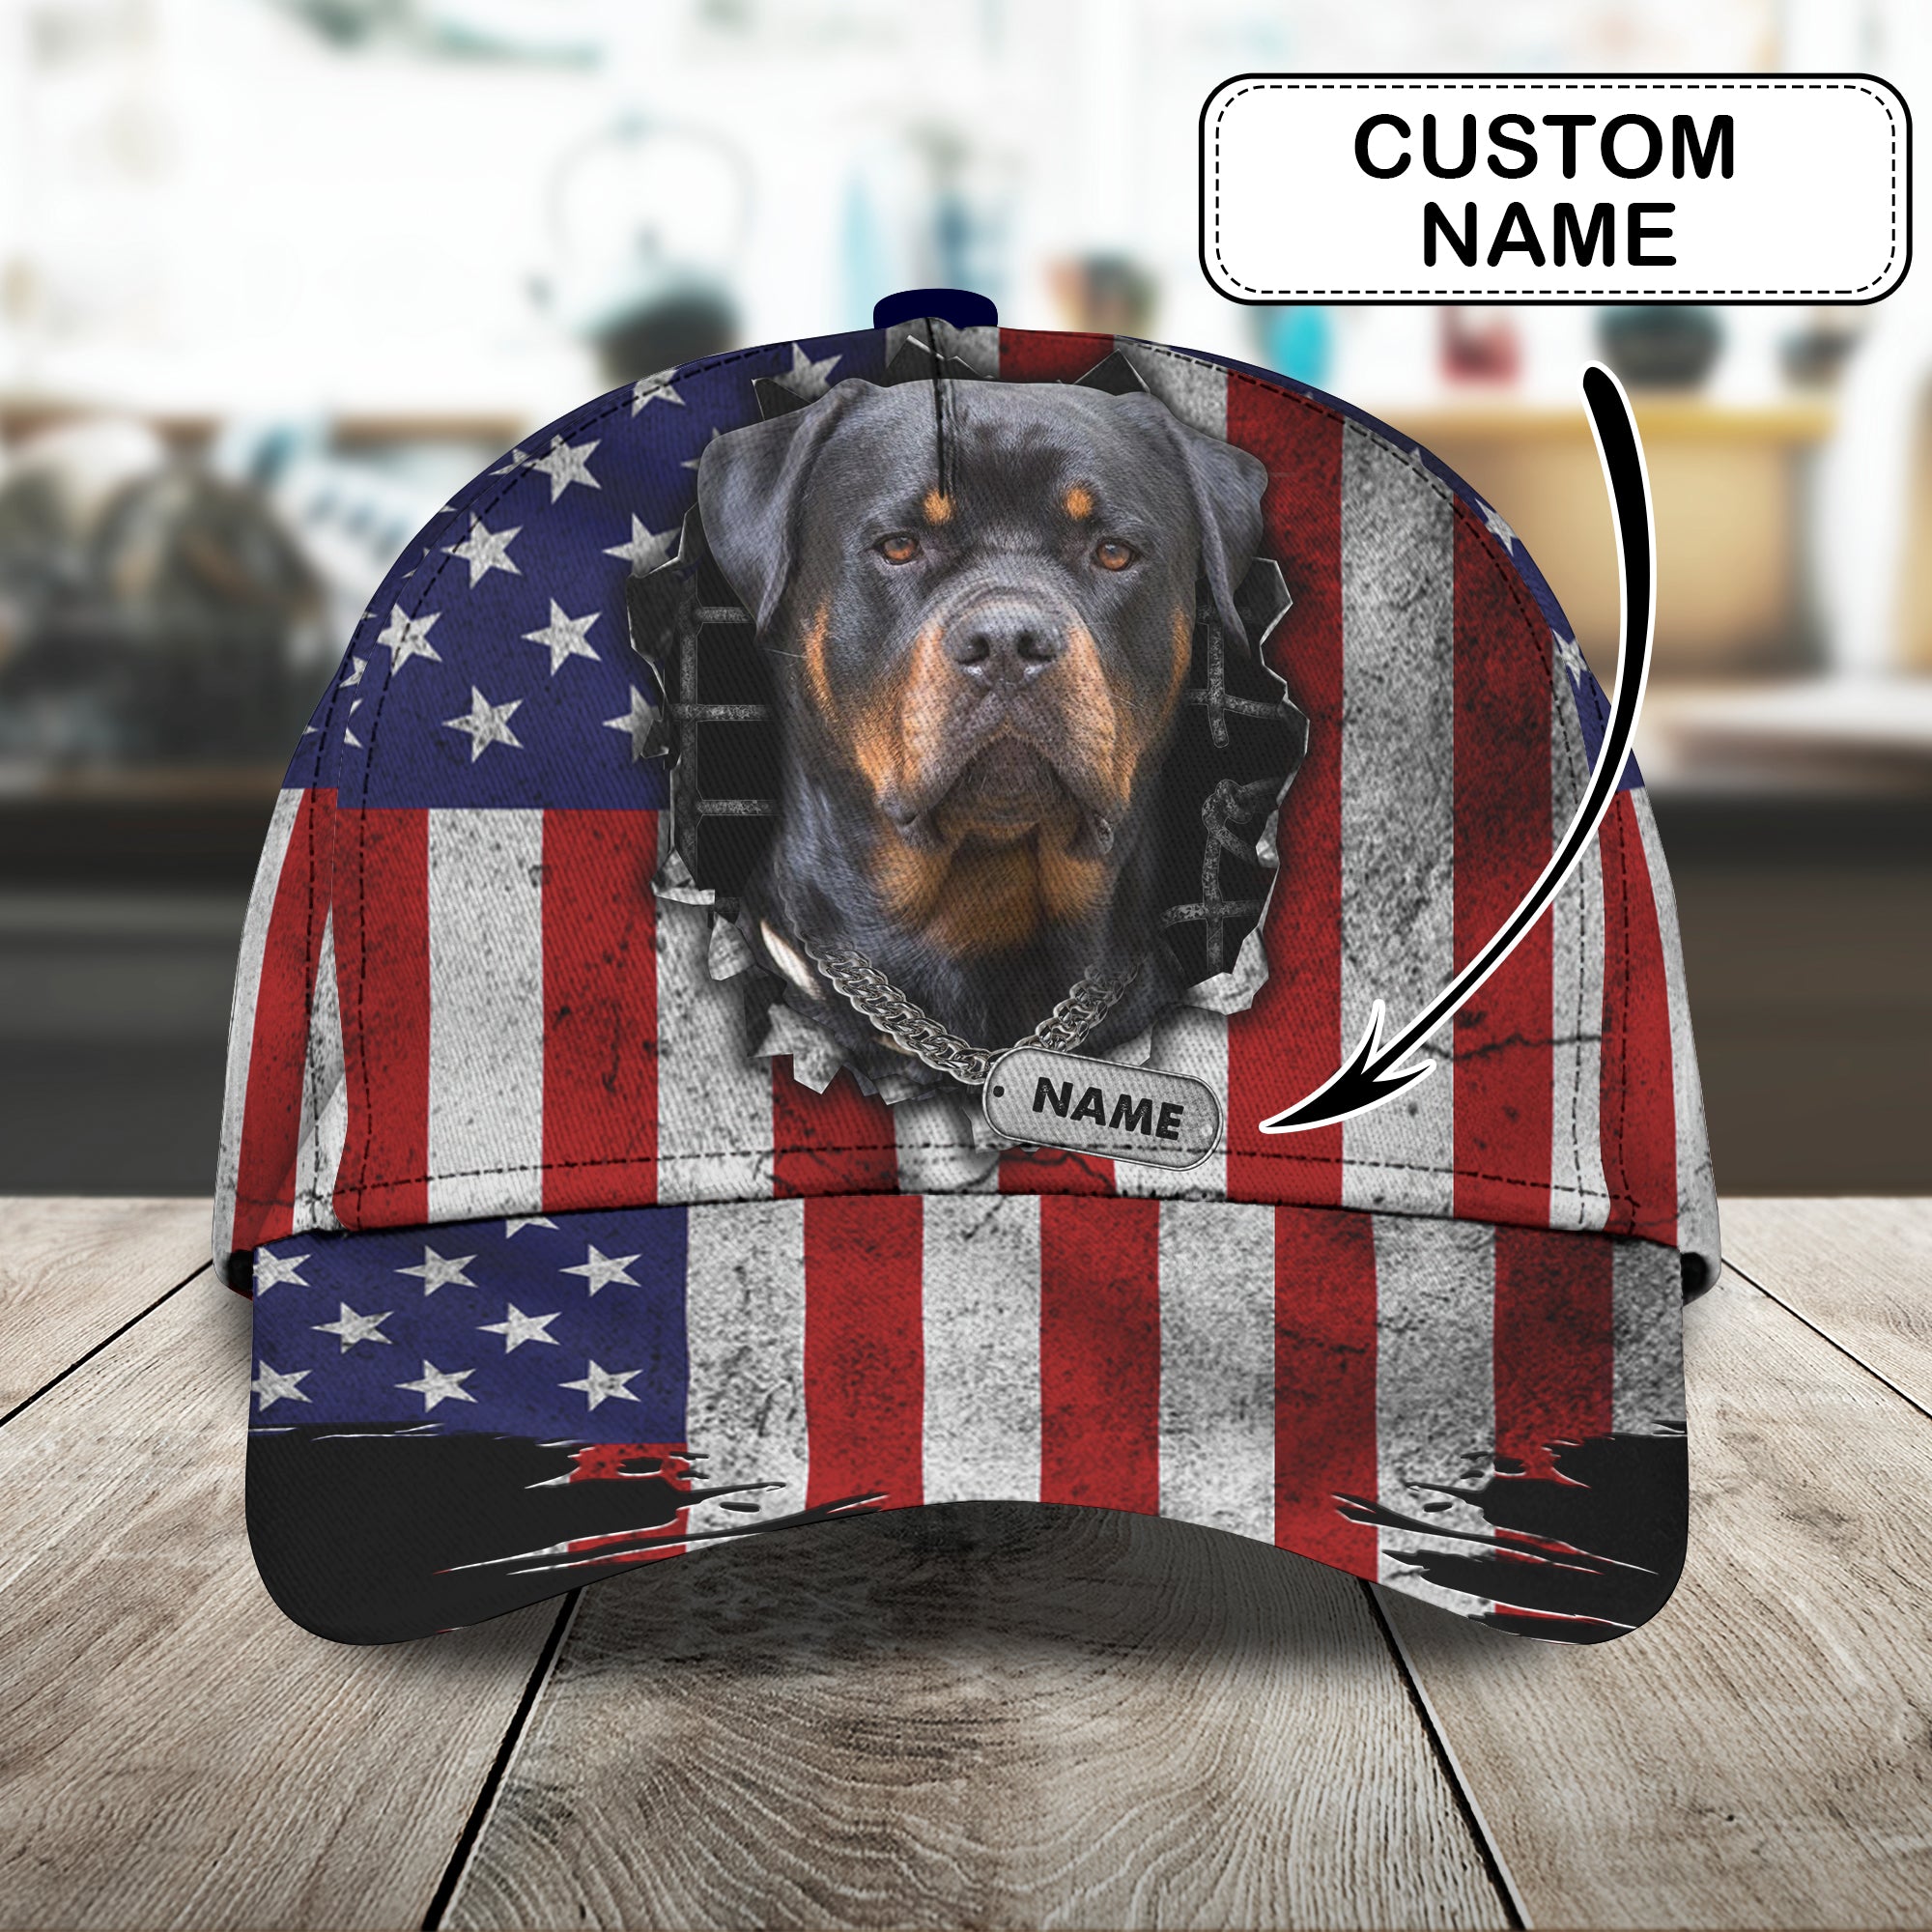 Rottweiler - Personalized Name Cap - Hd98 6